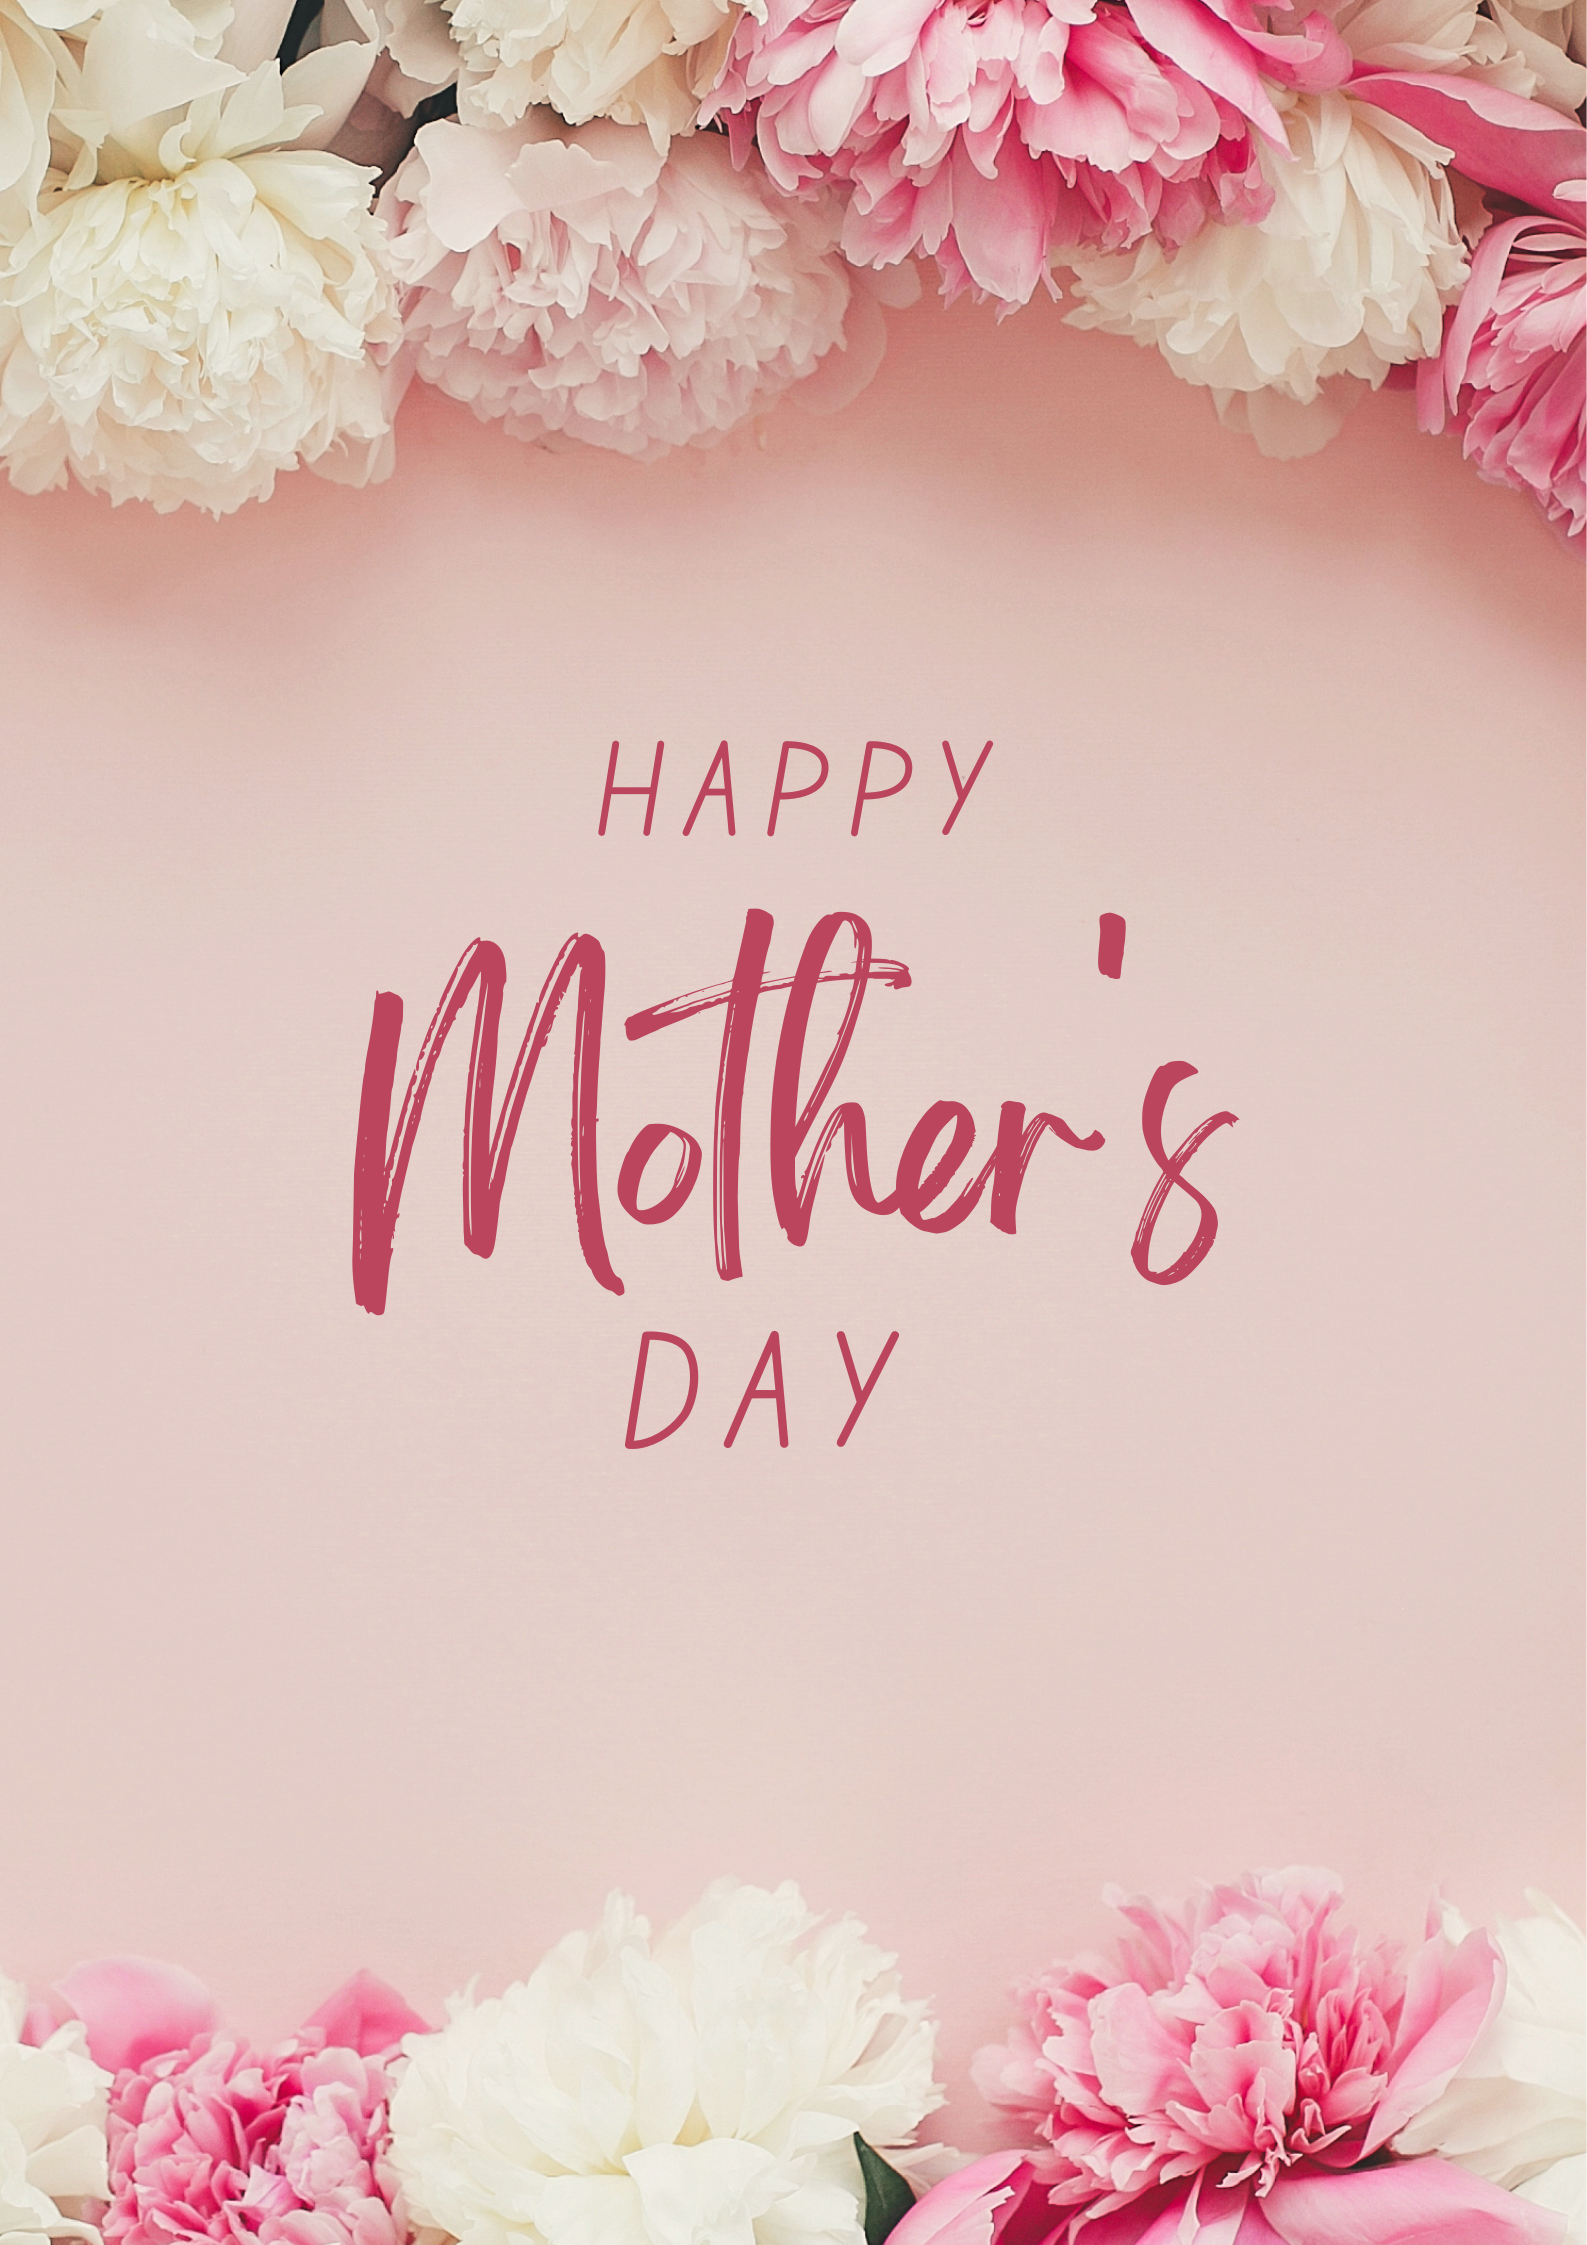 🌸 Celebrate Mother's Day with Hoodmarket.com! 🌸